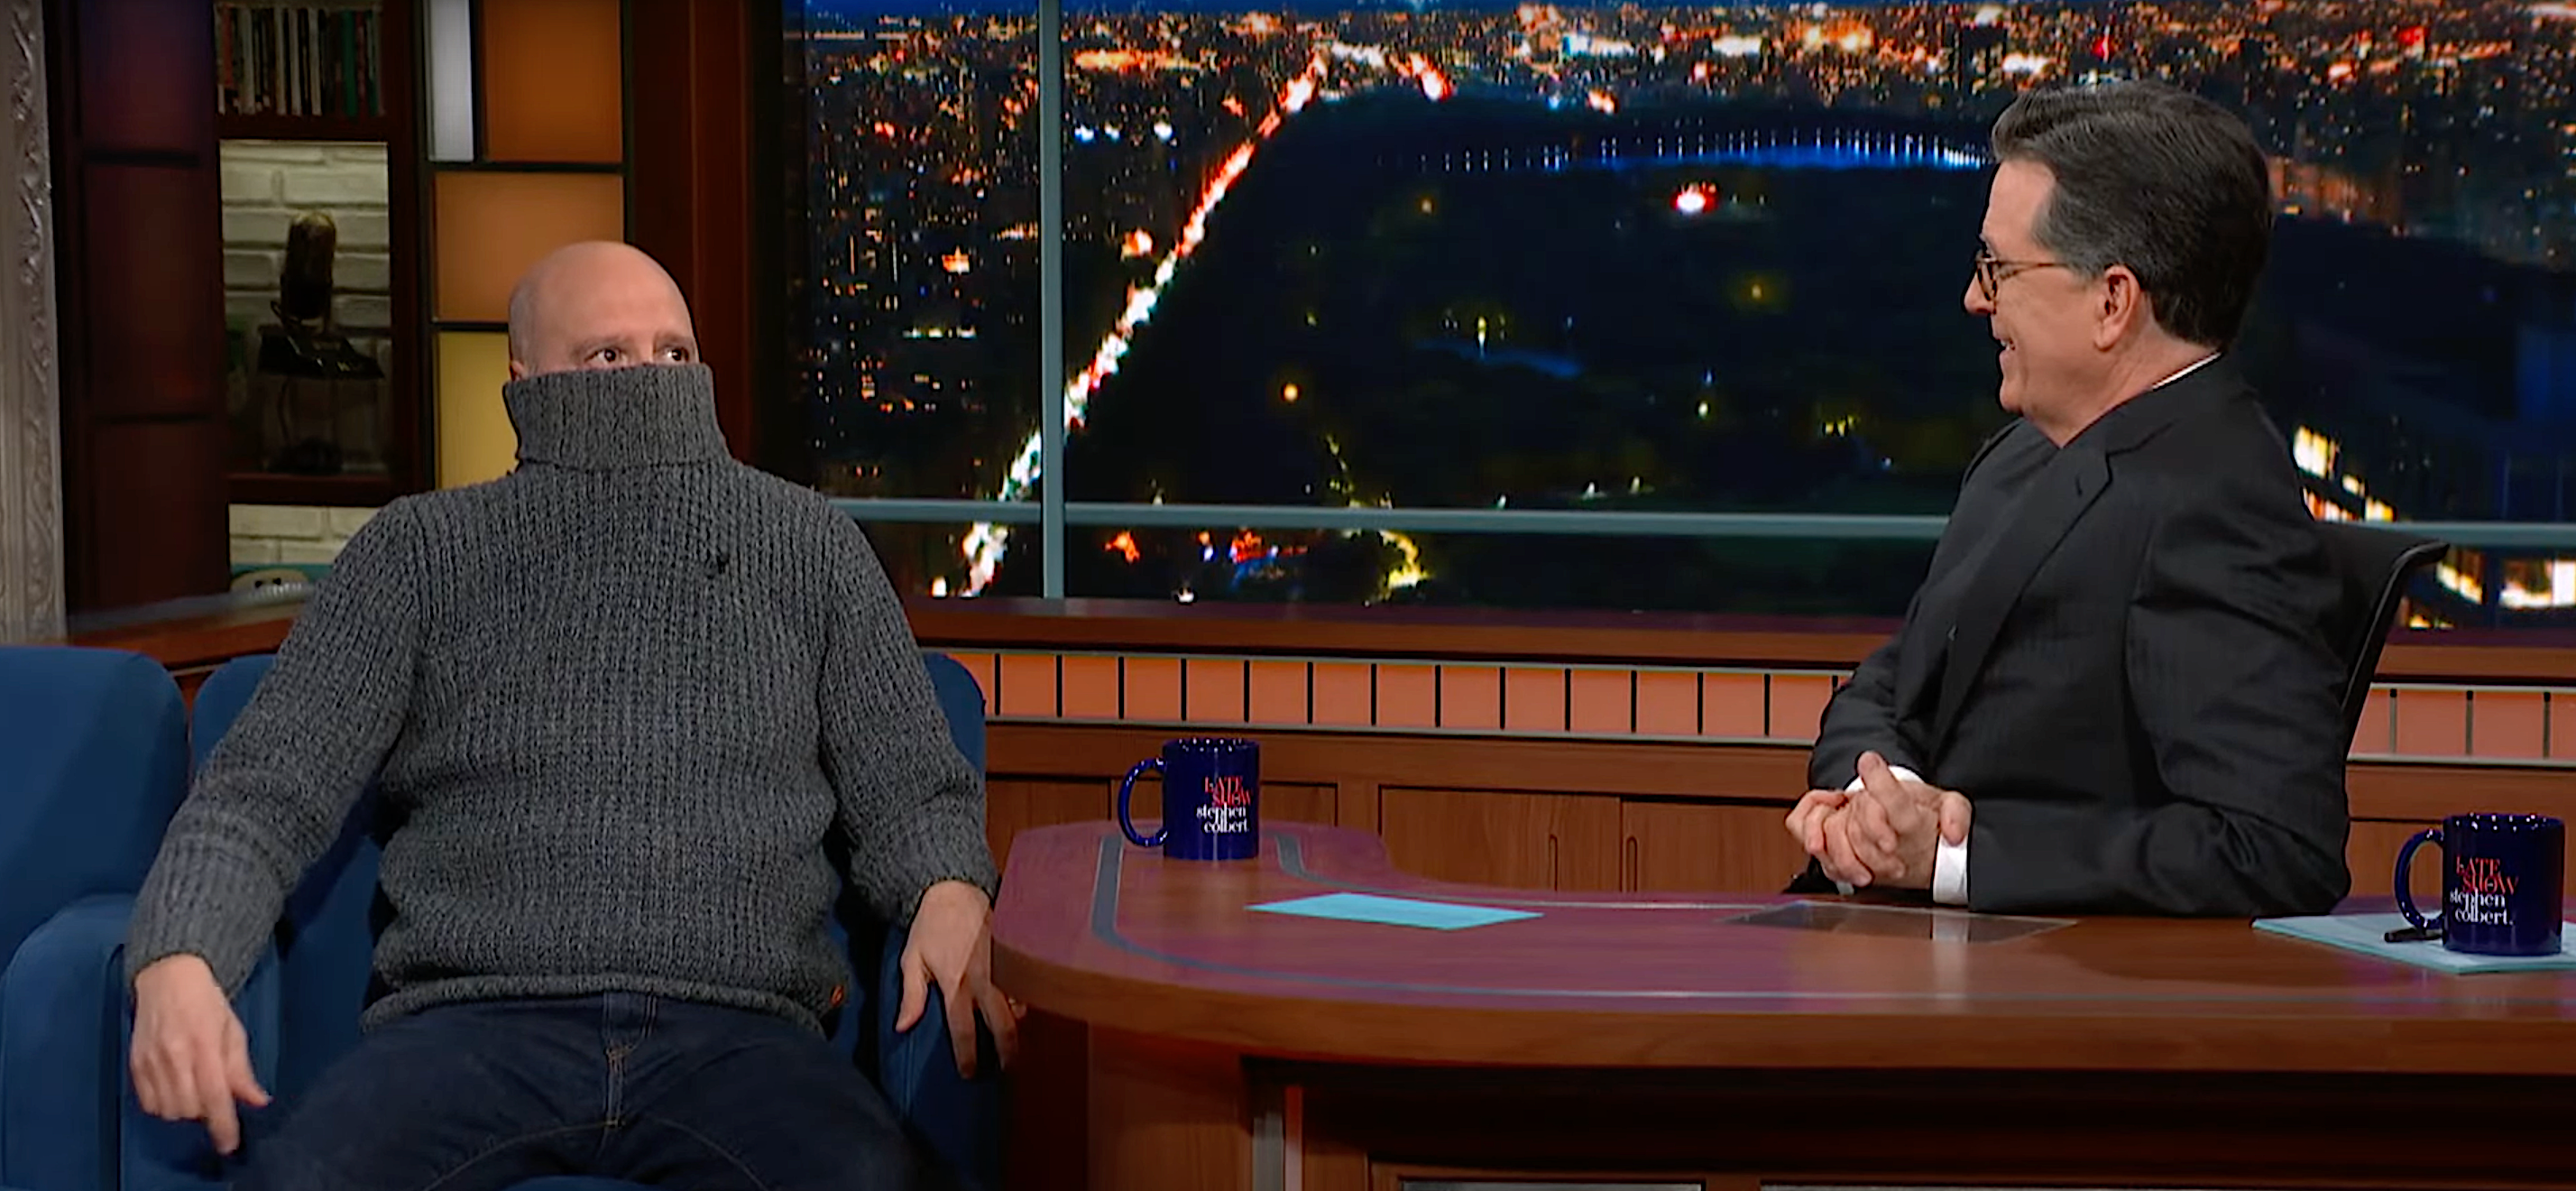 On The Late Show, David Cross eventually reveals he has a new comedy special coming out